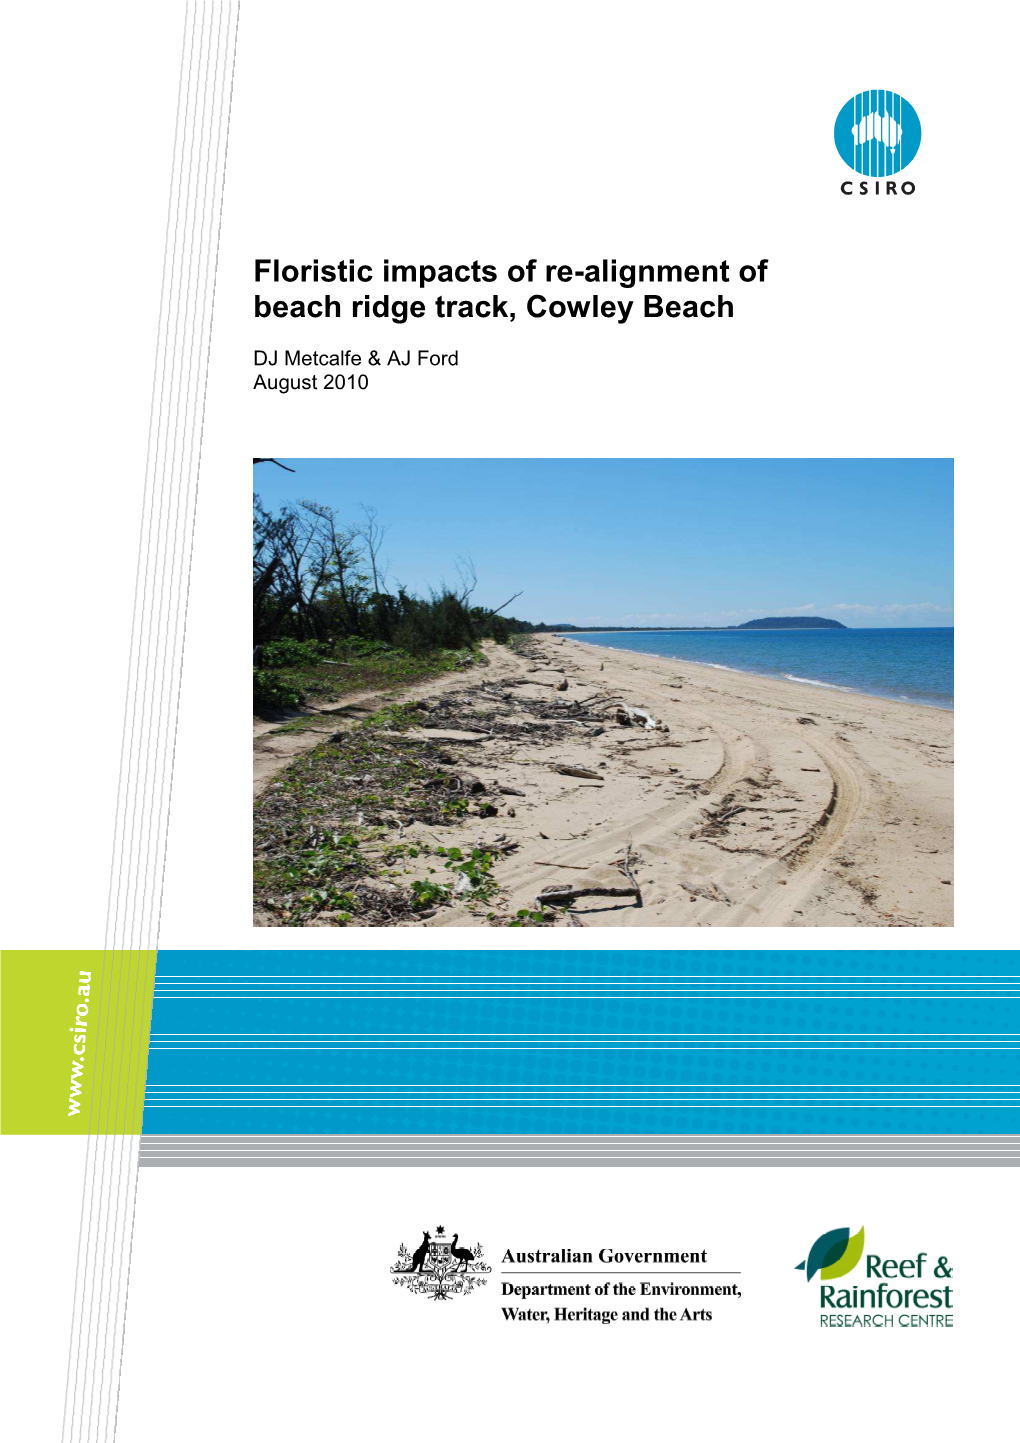 Floristic Impacts of Re-Alignment of Beach Ridge Track, Cowley Beach